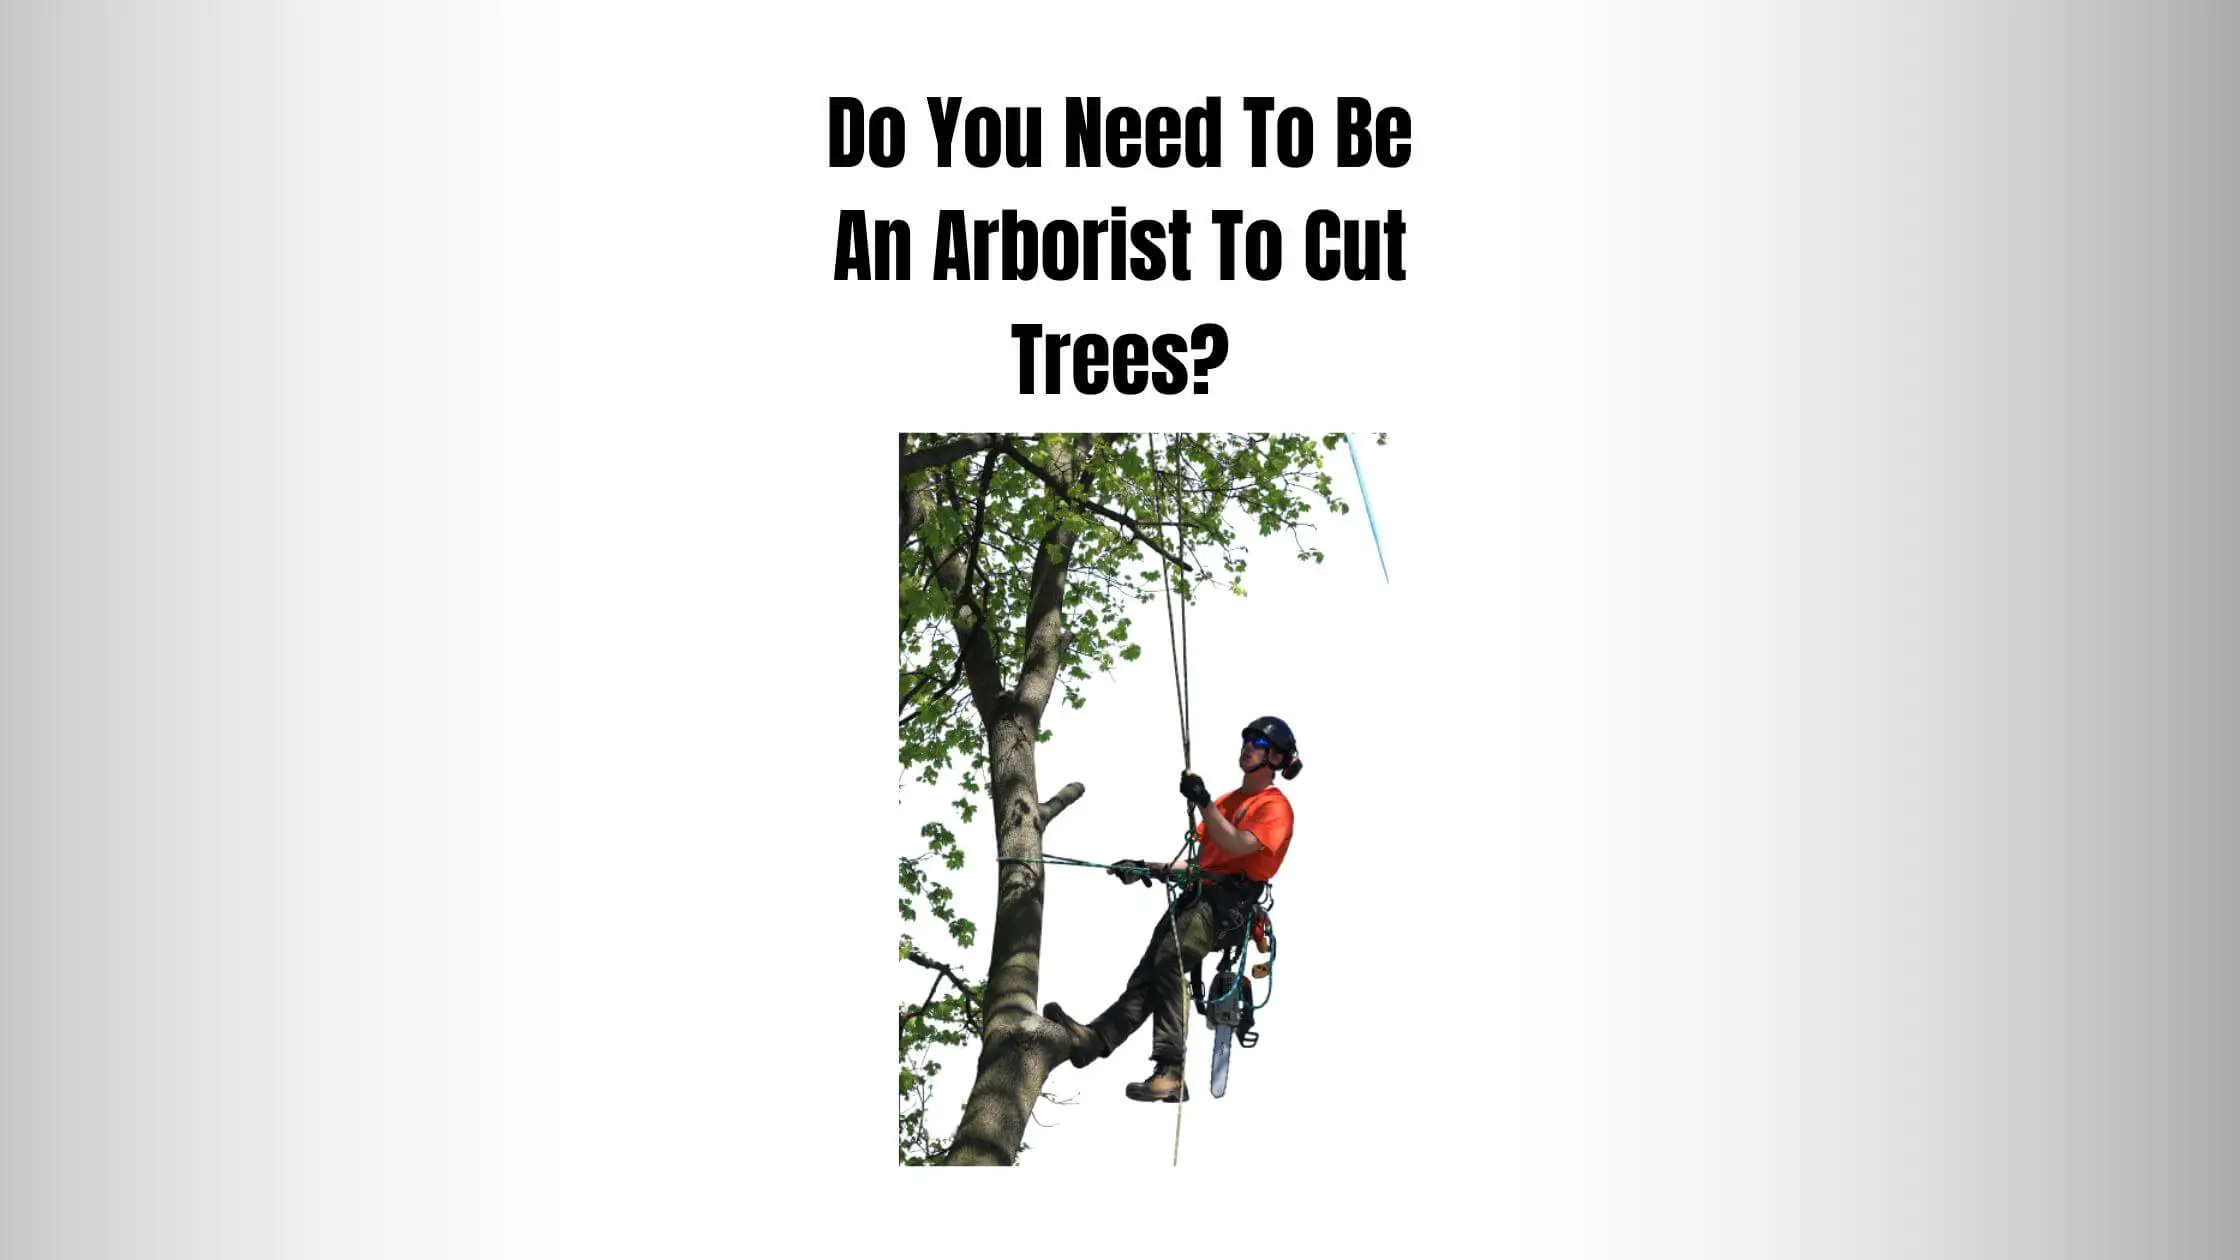 Do You Need To Be An Arborist To Cut Trees?